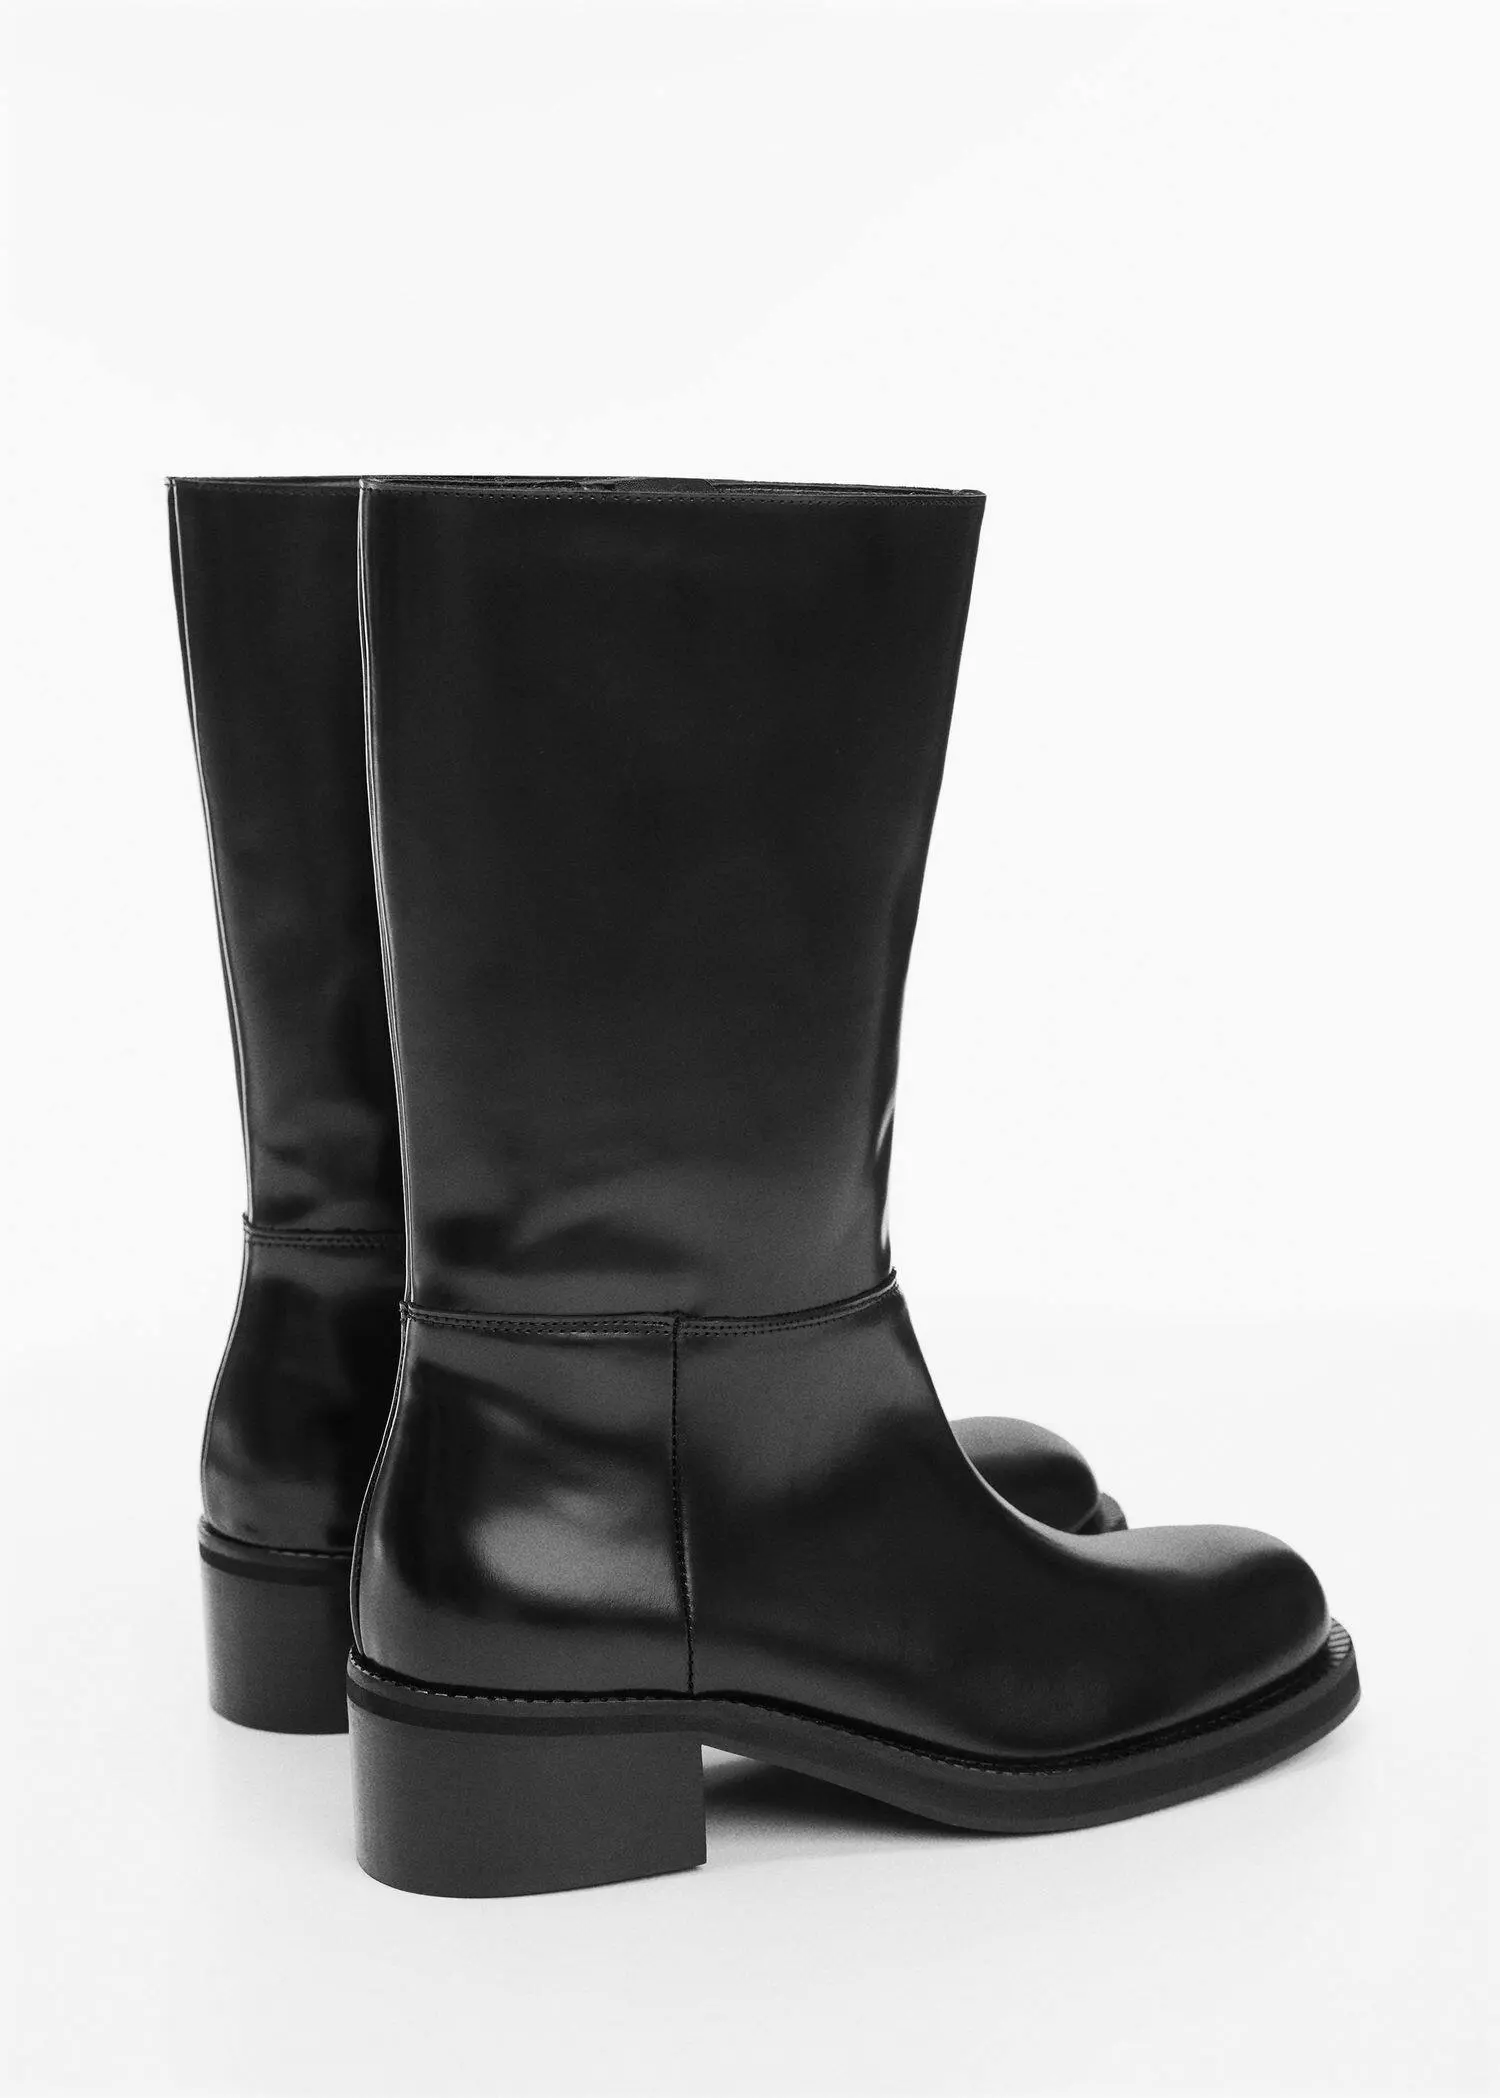 Mango Leather boots with zip closure. 3